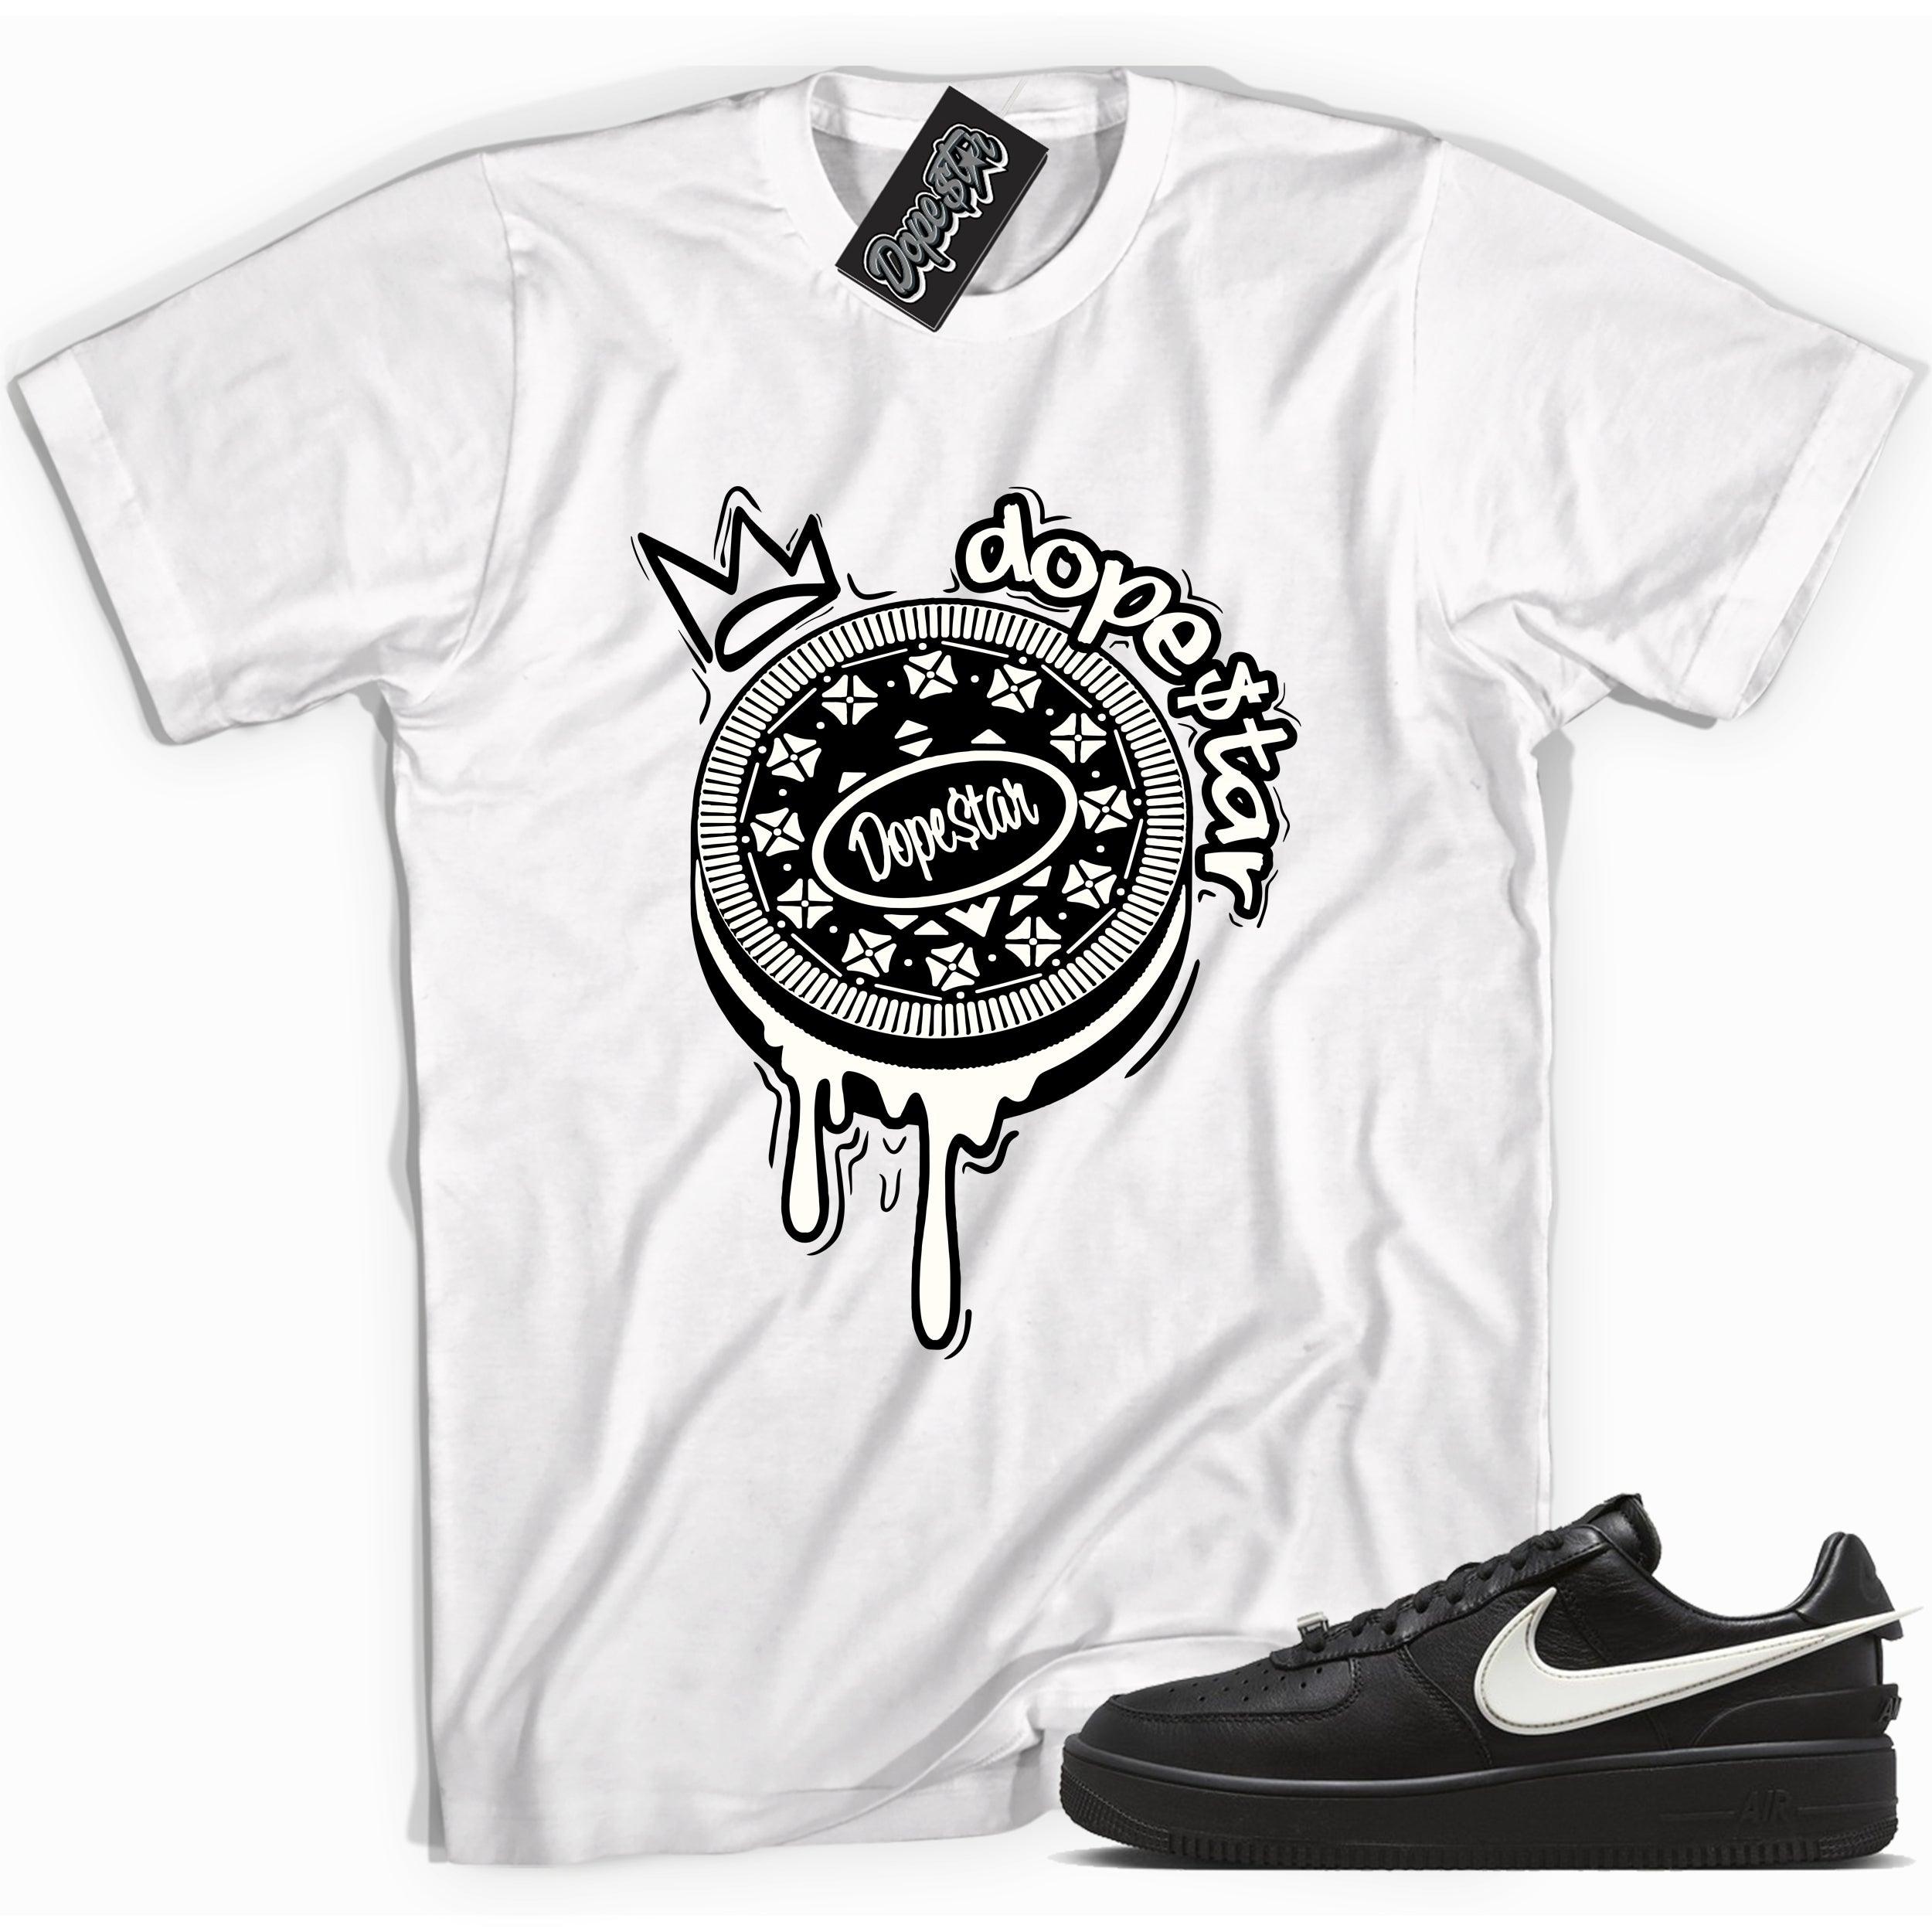 Cool white graphic tee with 'Oreo Dope$tar' print, that perfectly matches Nike Air Force 1 Low SP Ambush Phantom sneakers.